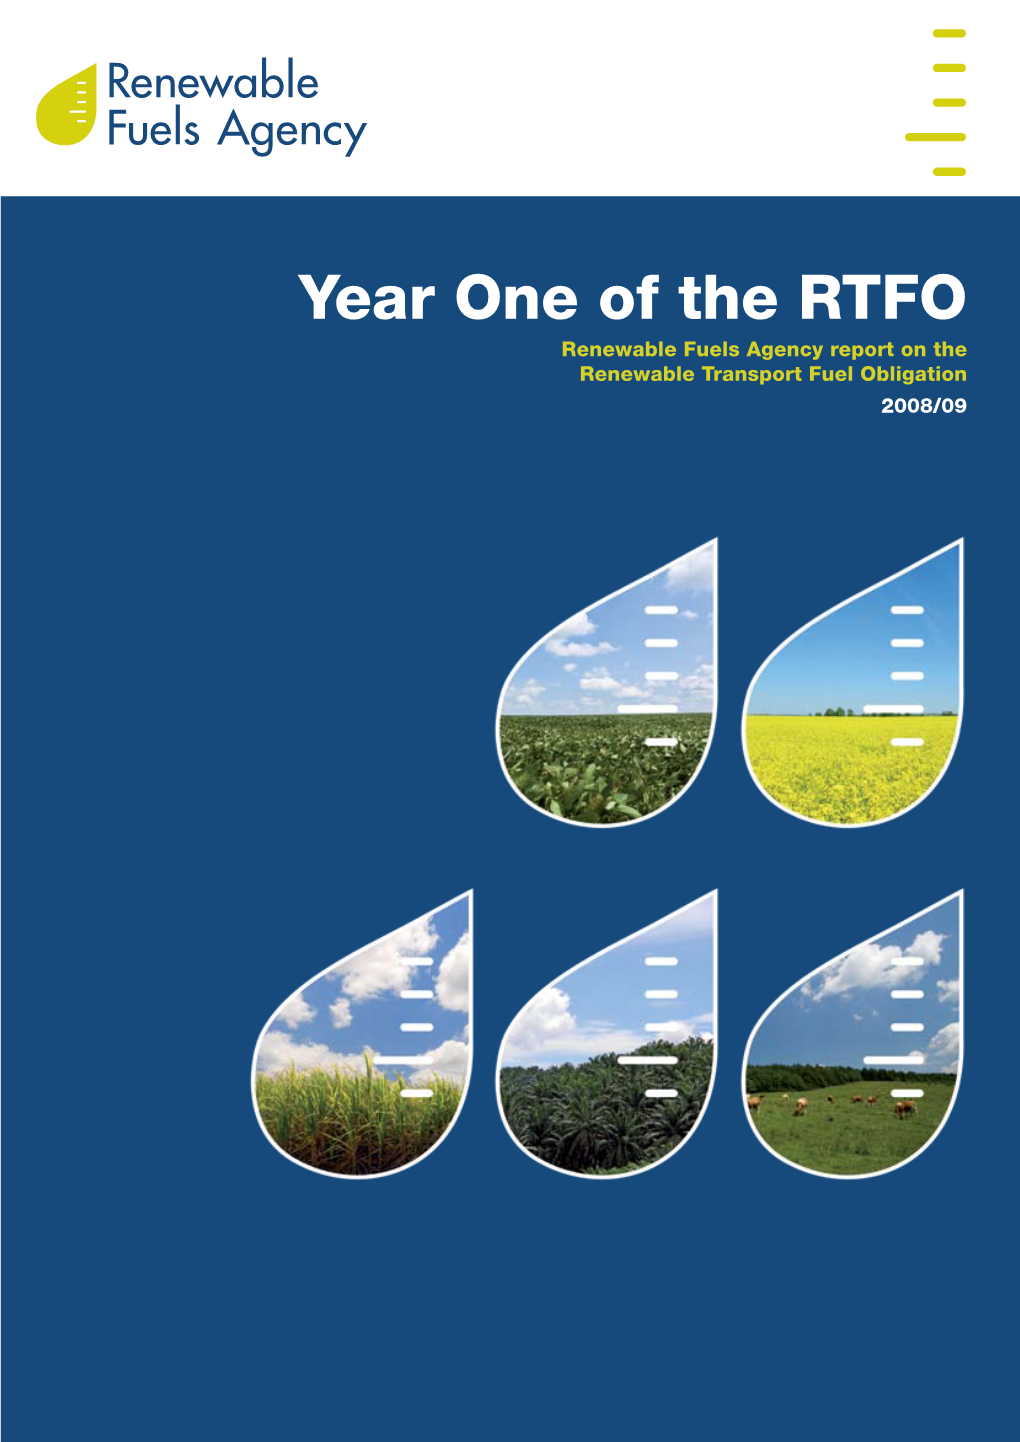 Year One of the RTFO Renewable Fuels Agency Report on the Renewable Transport Fuel Obligation 2008/09